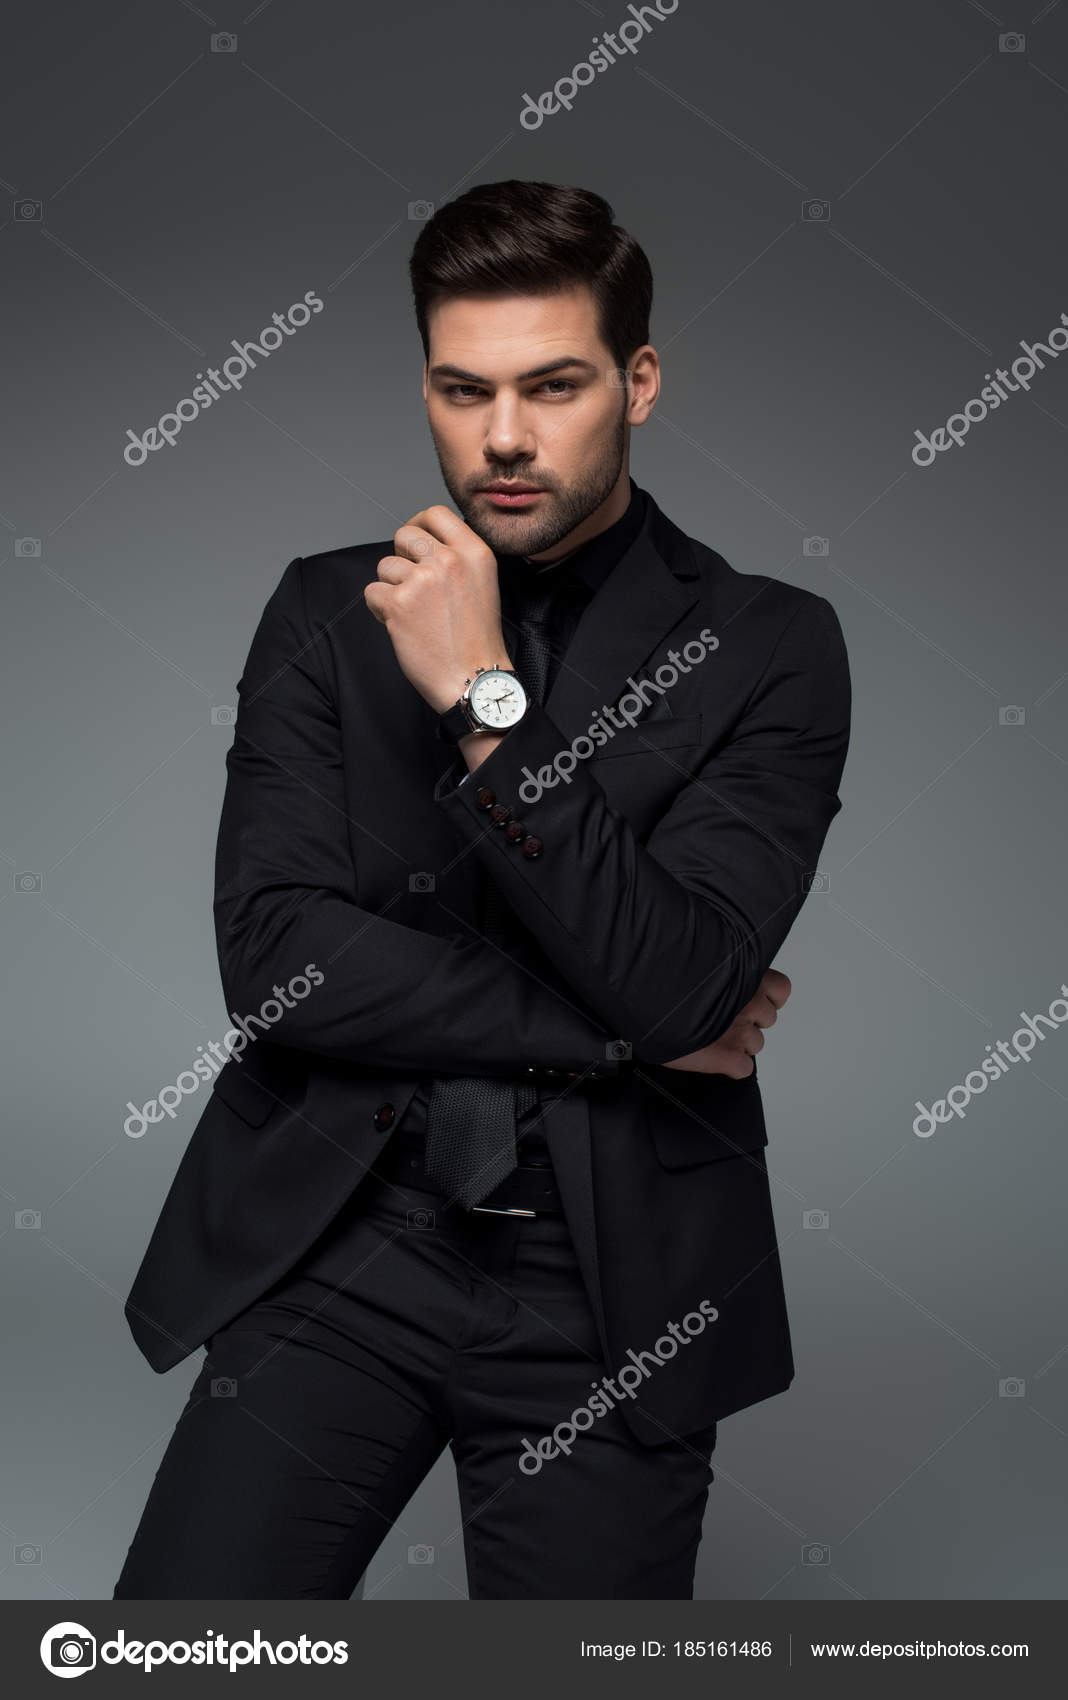 Men's Pose In Suit | Male poses, Suits, Photo to video